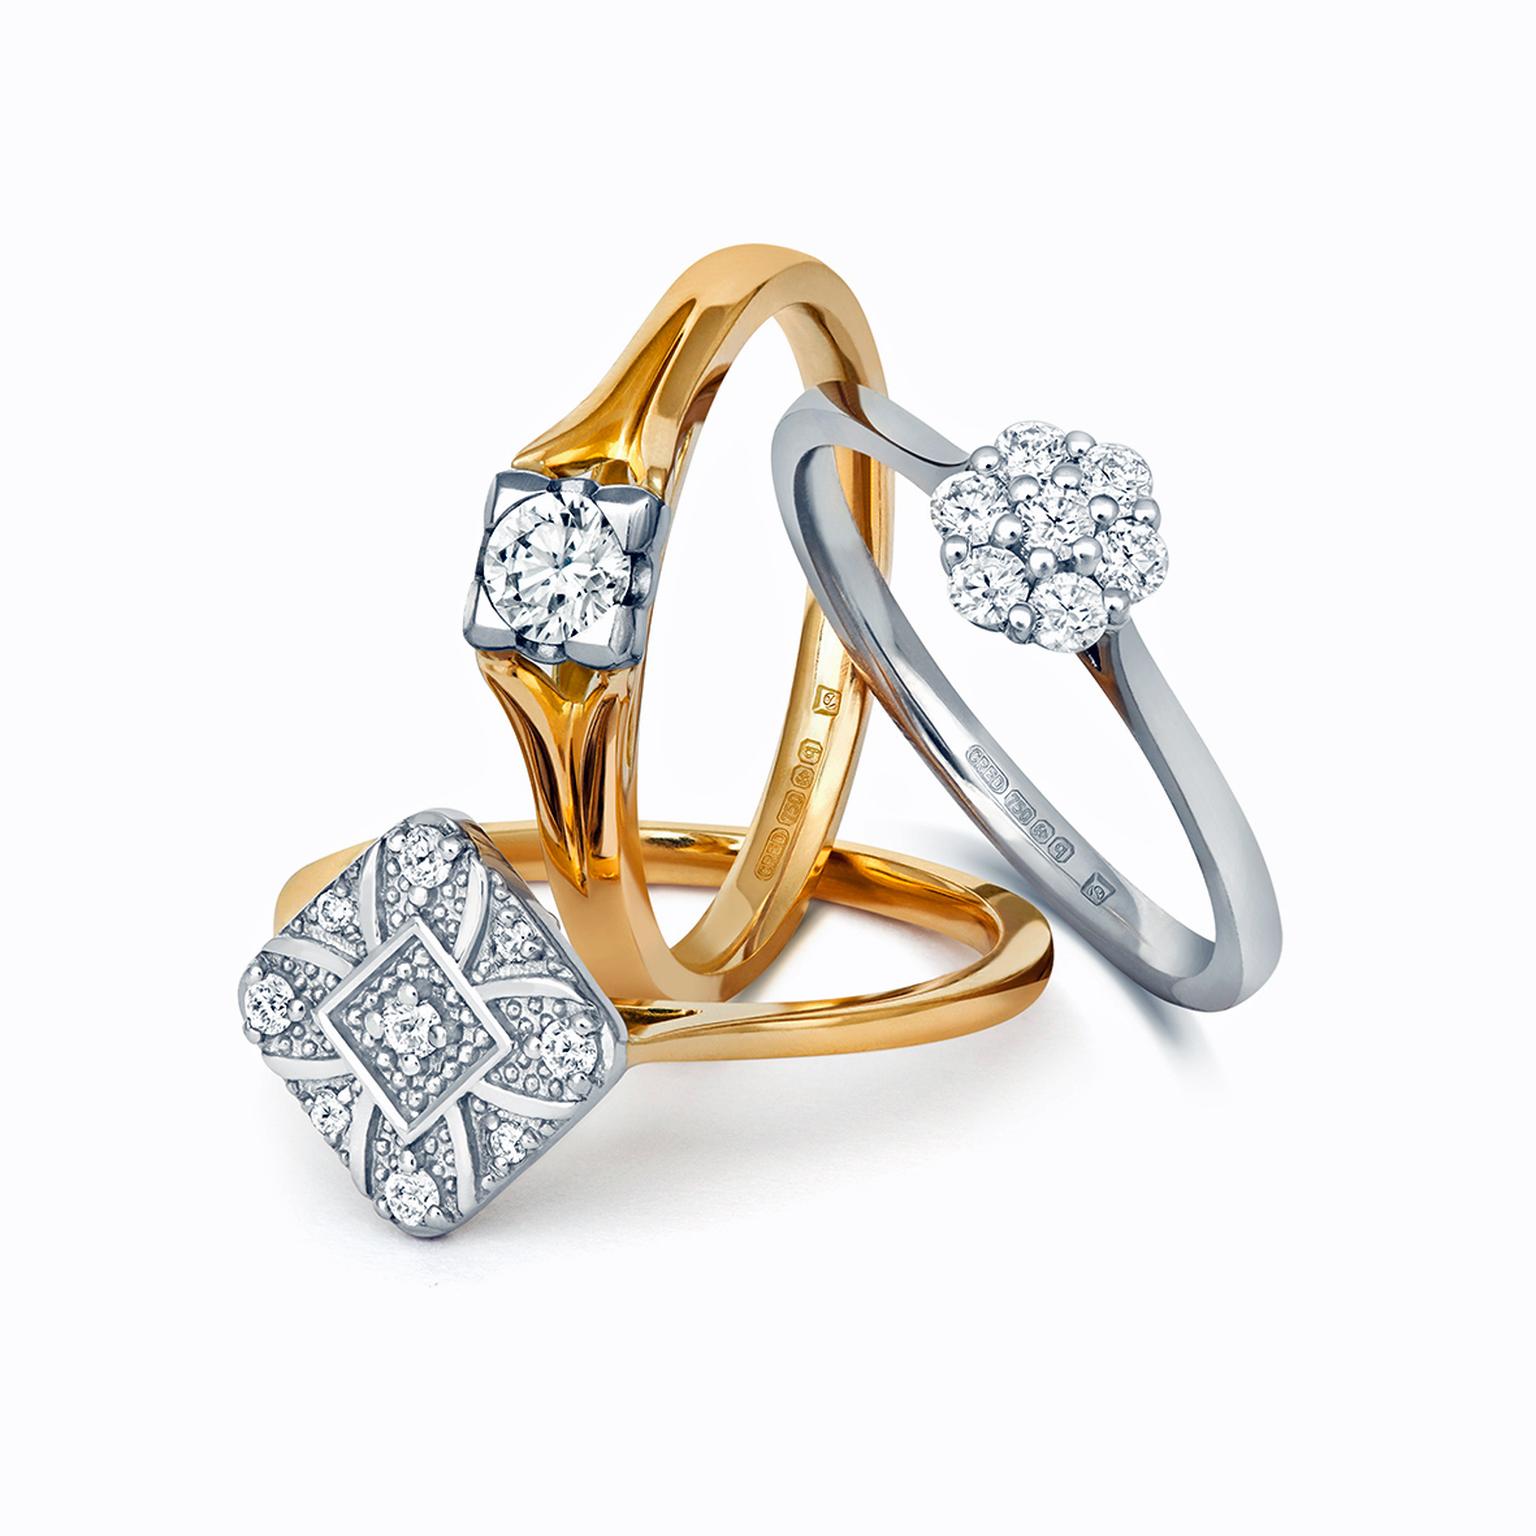 Cred diamond and Fairtrade gold engagement rings